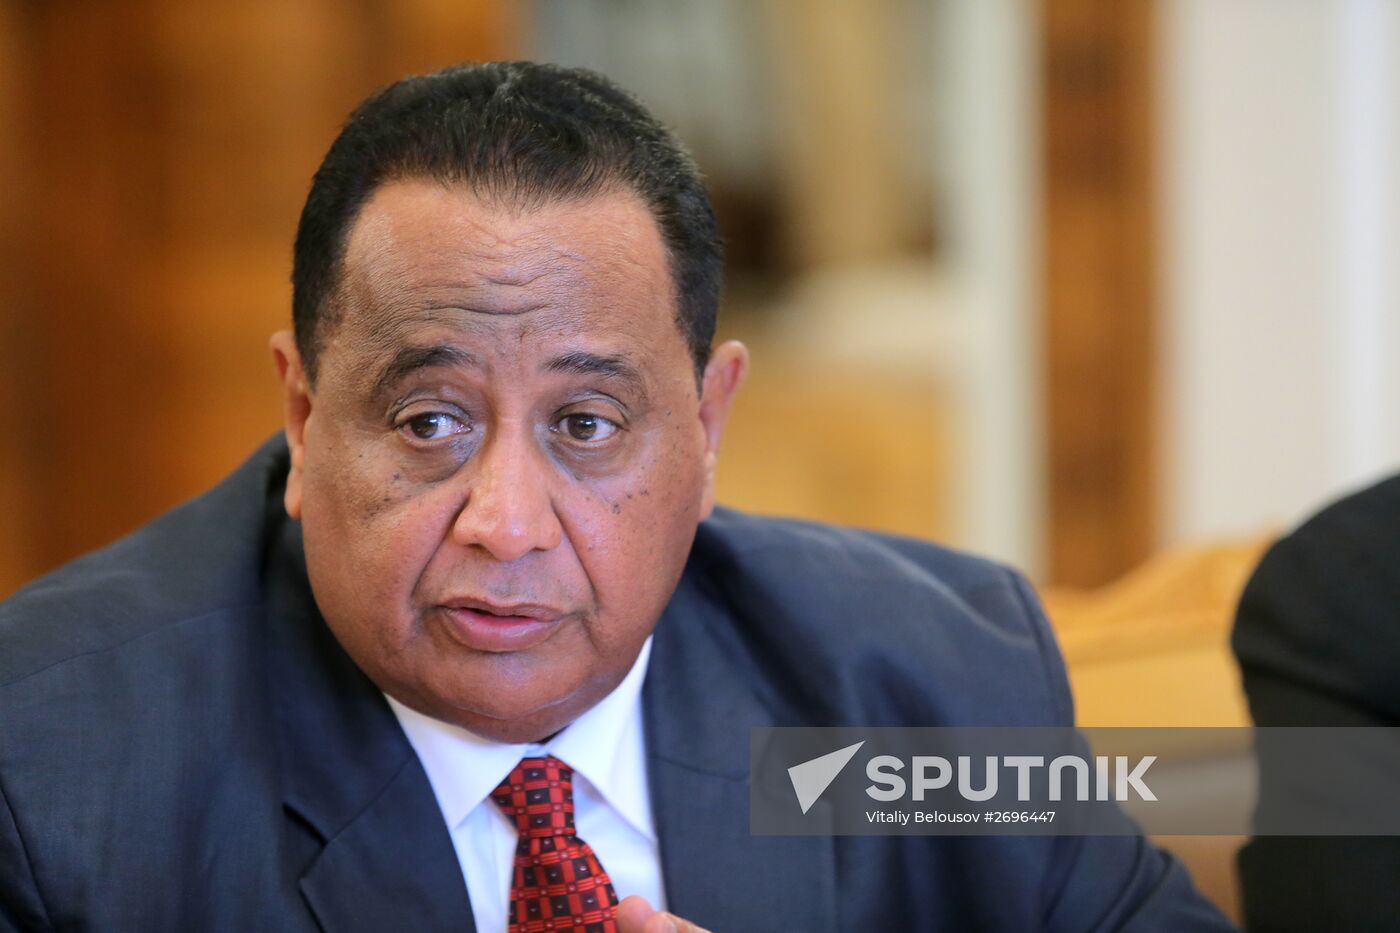 Russian Foreign Minister Sergei Lavrov meets with Sudanese Foreign Minister Ibrahim Ghandour